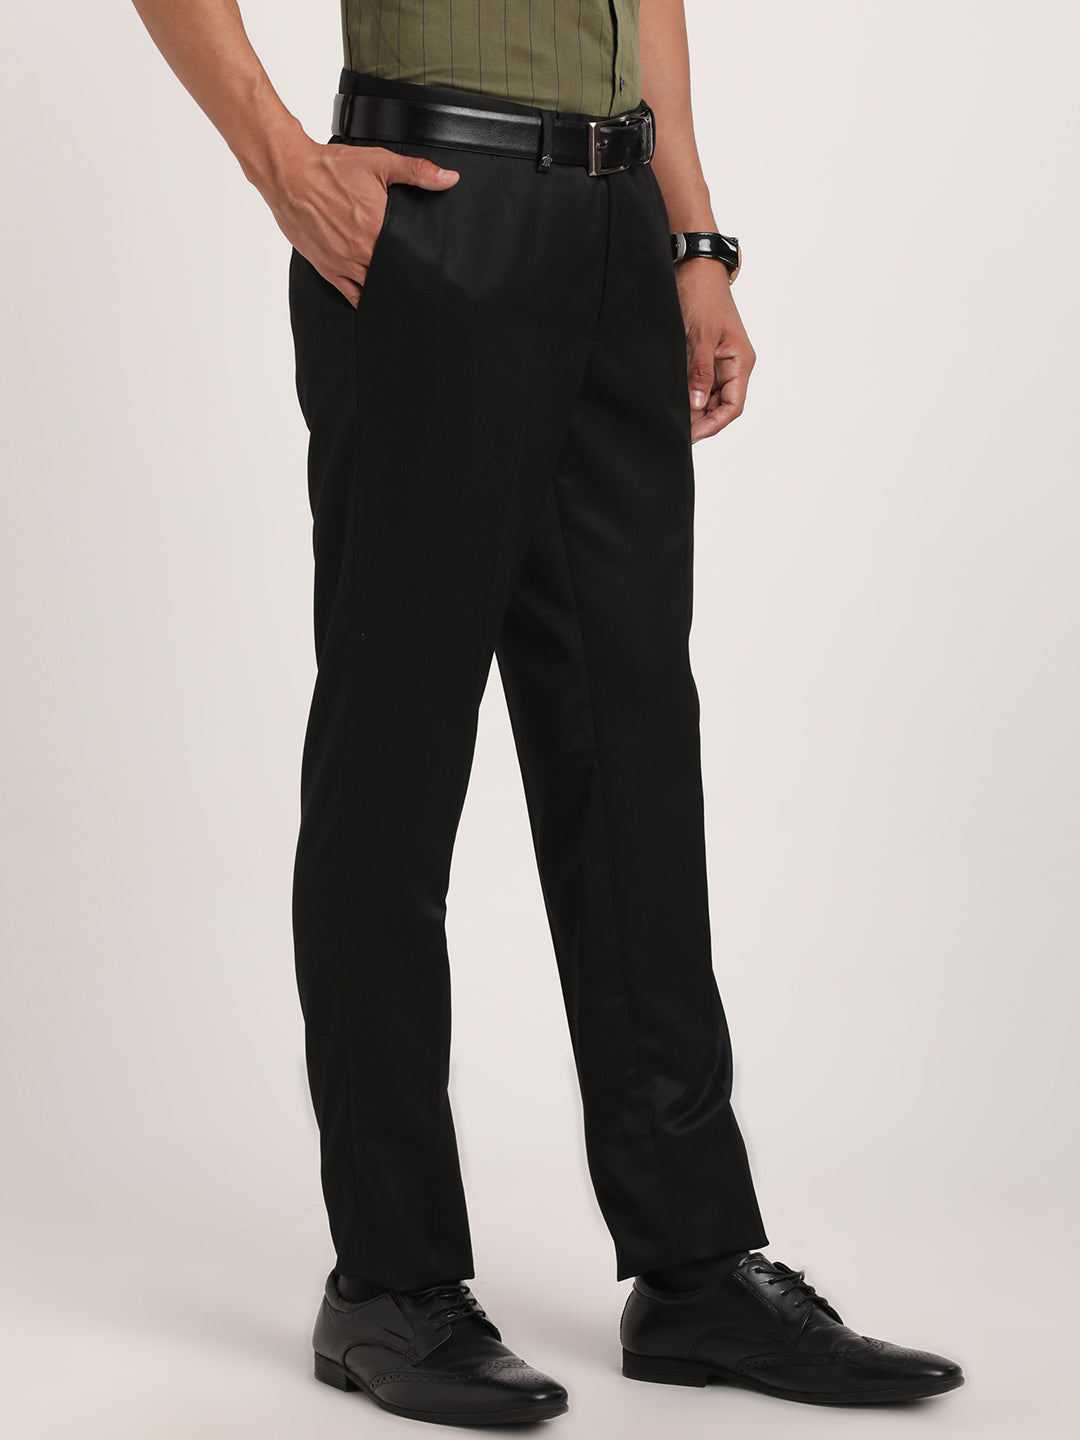 Mens Extra Slim Fit Solid Black Flat Front Wool Dress Pants | The Suit Depot